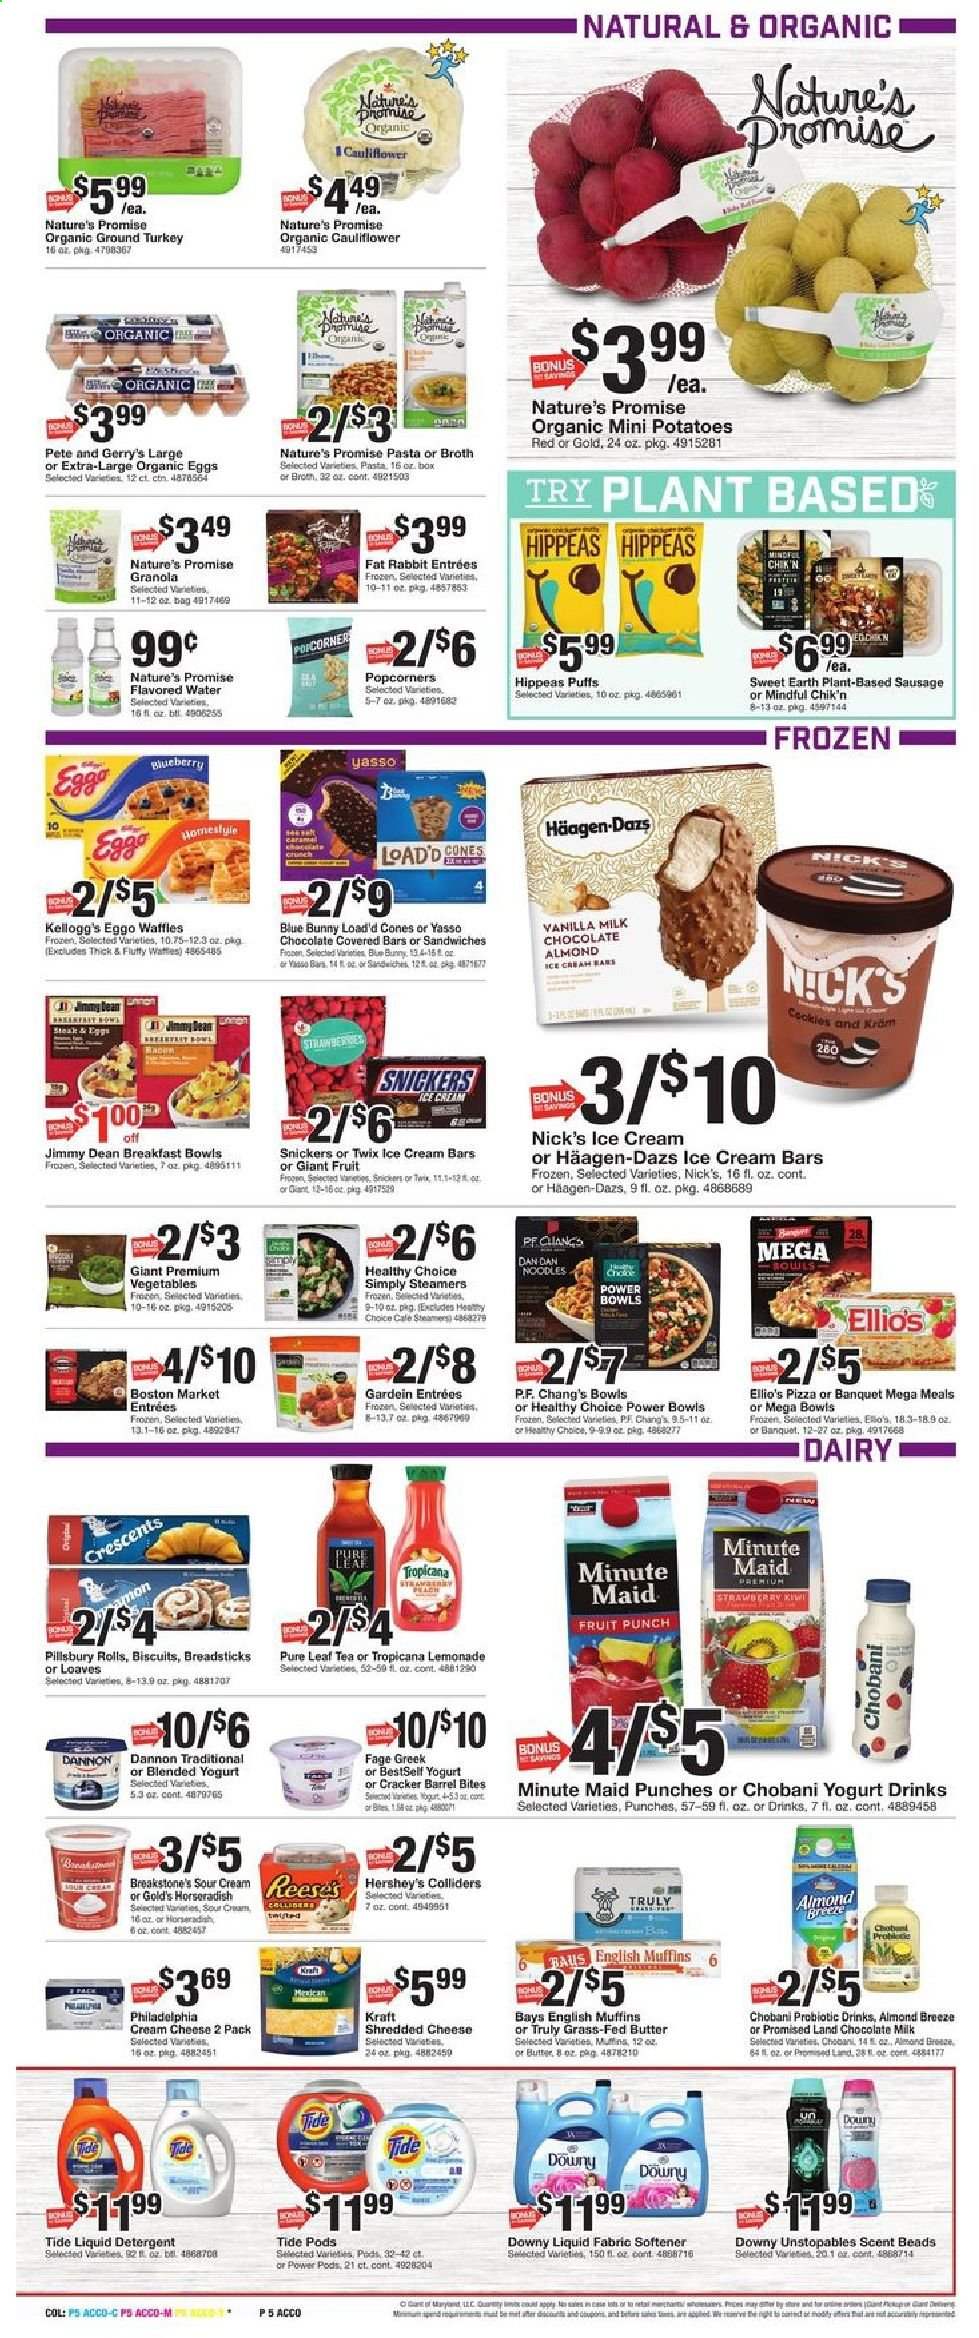 thumbnail - Giant Food Flyer - 06/18/2021 - 06/24/2021 - Sales products - english muffins, Nature’s Promise, puffs, waffles, cauliflower, horseradish, potatoes, pizza, sandwich, breakfast bowl, Pillsbury, noodles, Healthy Choice, Kraft®, Jimmy Dean, bacon, sausage, cream cheese, shredded cheese, Philadelphia, yoghurt, Chobani, Dannon, yoghurt drink, Almond Breeze, eggs, butter, sour cream, ice cream, ice cream bars, Hershey's, Häagen-Dazs, Nick's Ice Cream, Blue Bunny, Snickers, Twix, crackers, Kellogg's, biscuit, Ego, bread sticks, popcorn, broth, granola, lemonade, fruit punch, flavored water, tea, Pure Leaf, TRULY, ground turkey, steak, detergent, Tide, Unstopables, fabric softener, liquid detergent, Downy Laundry. Page 5.